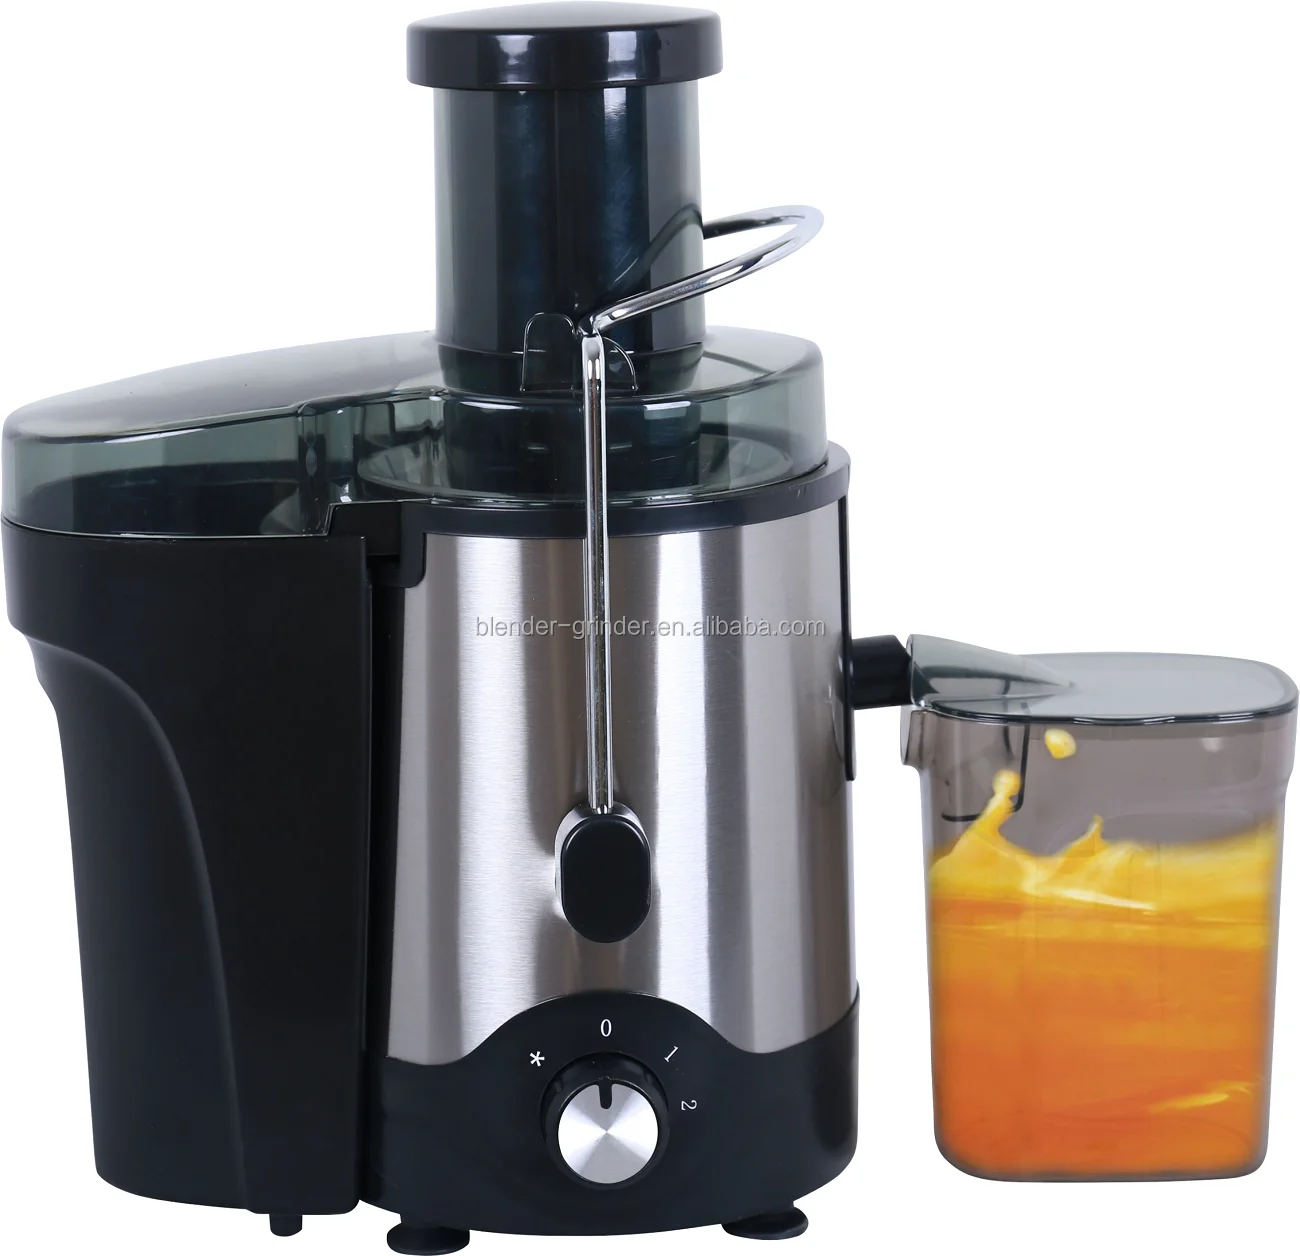 Mini electric juicer machine for 